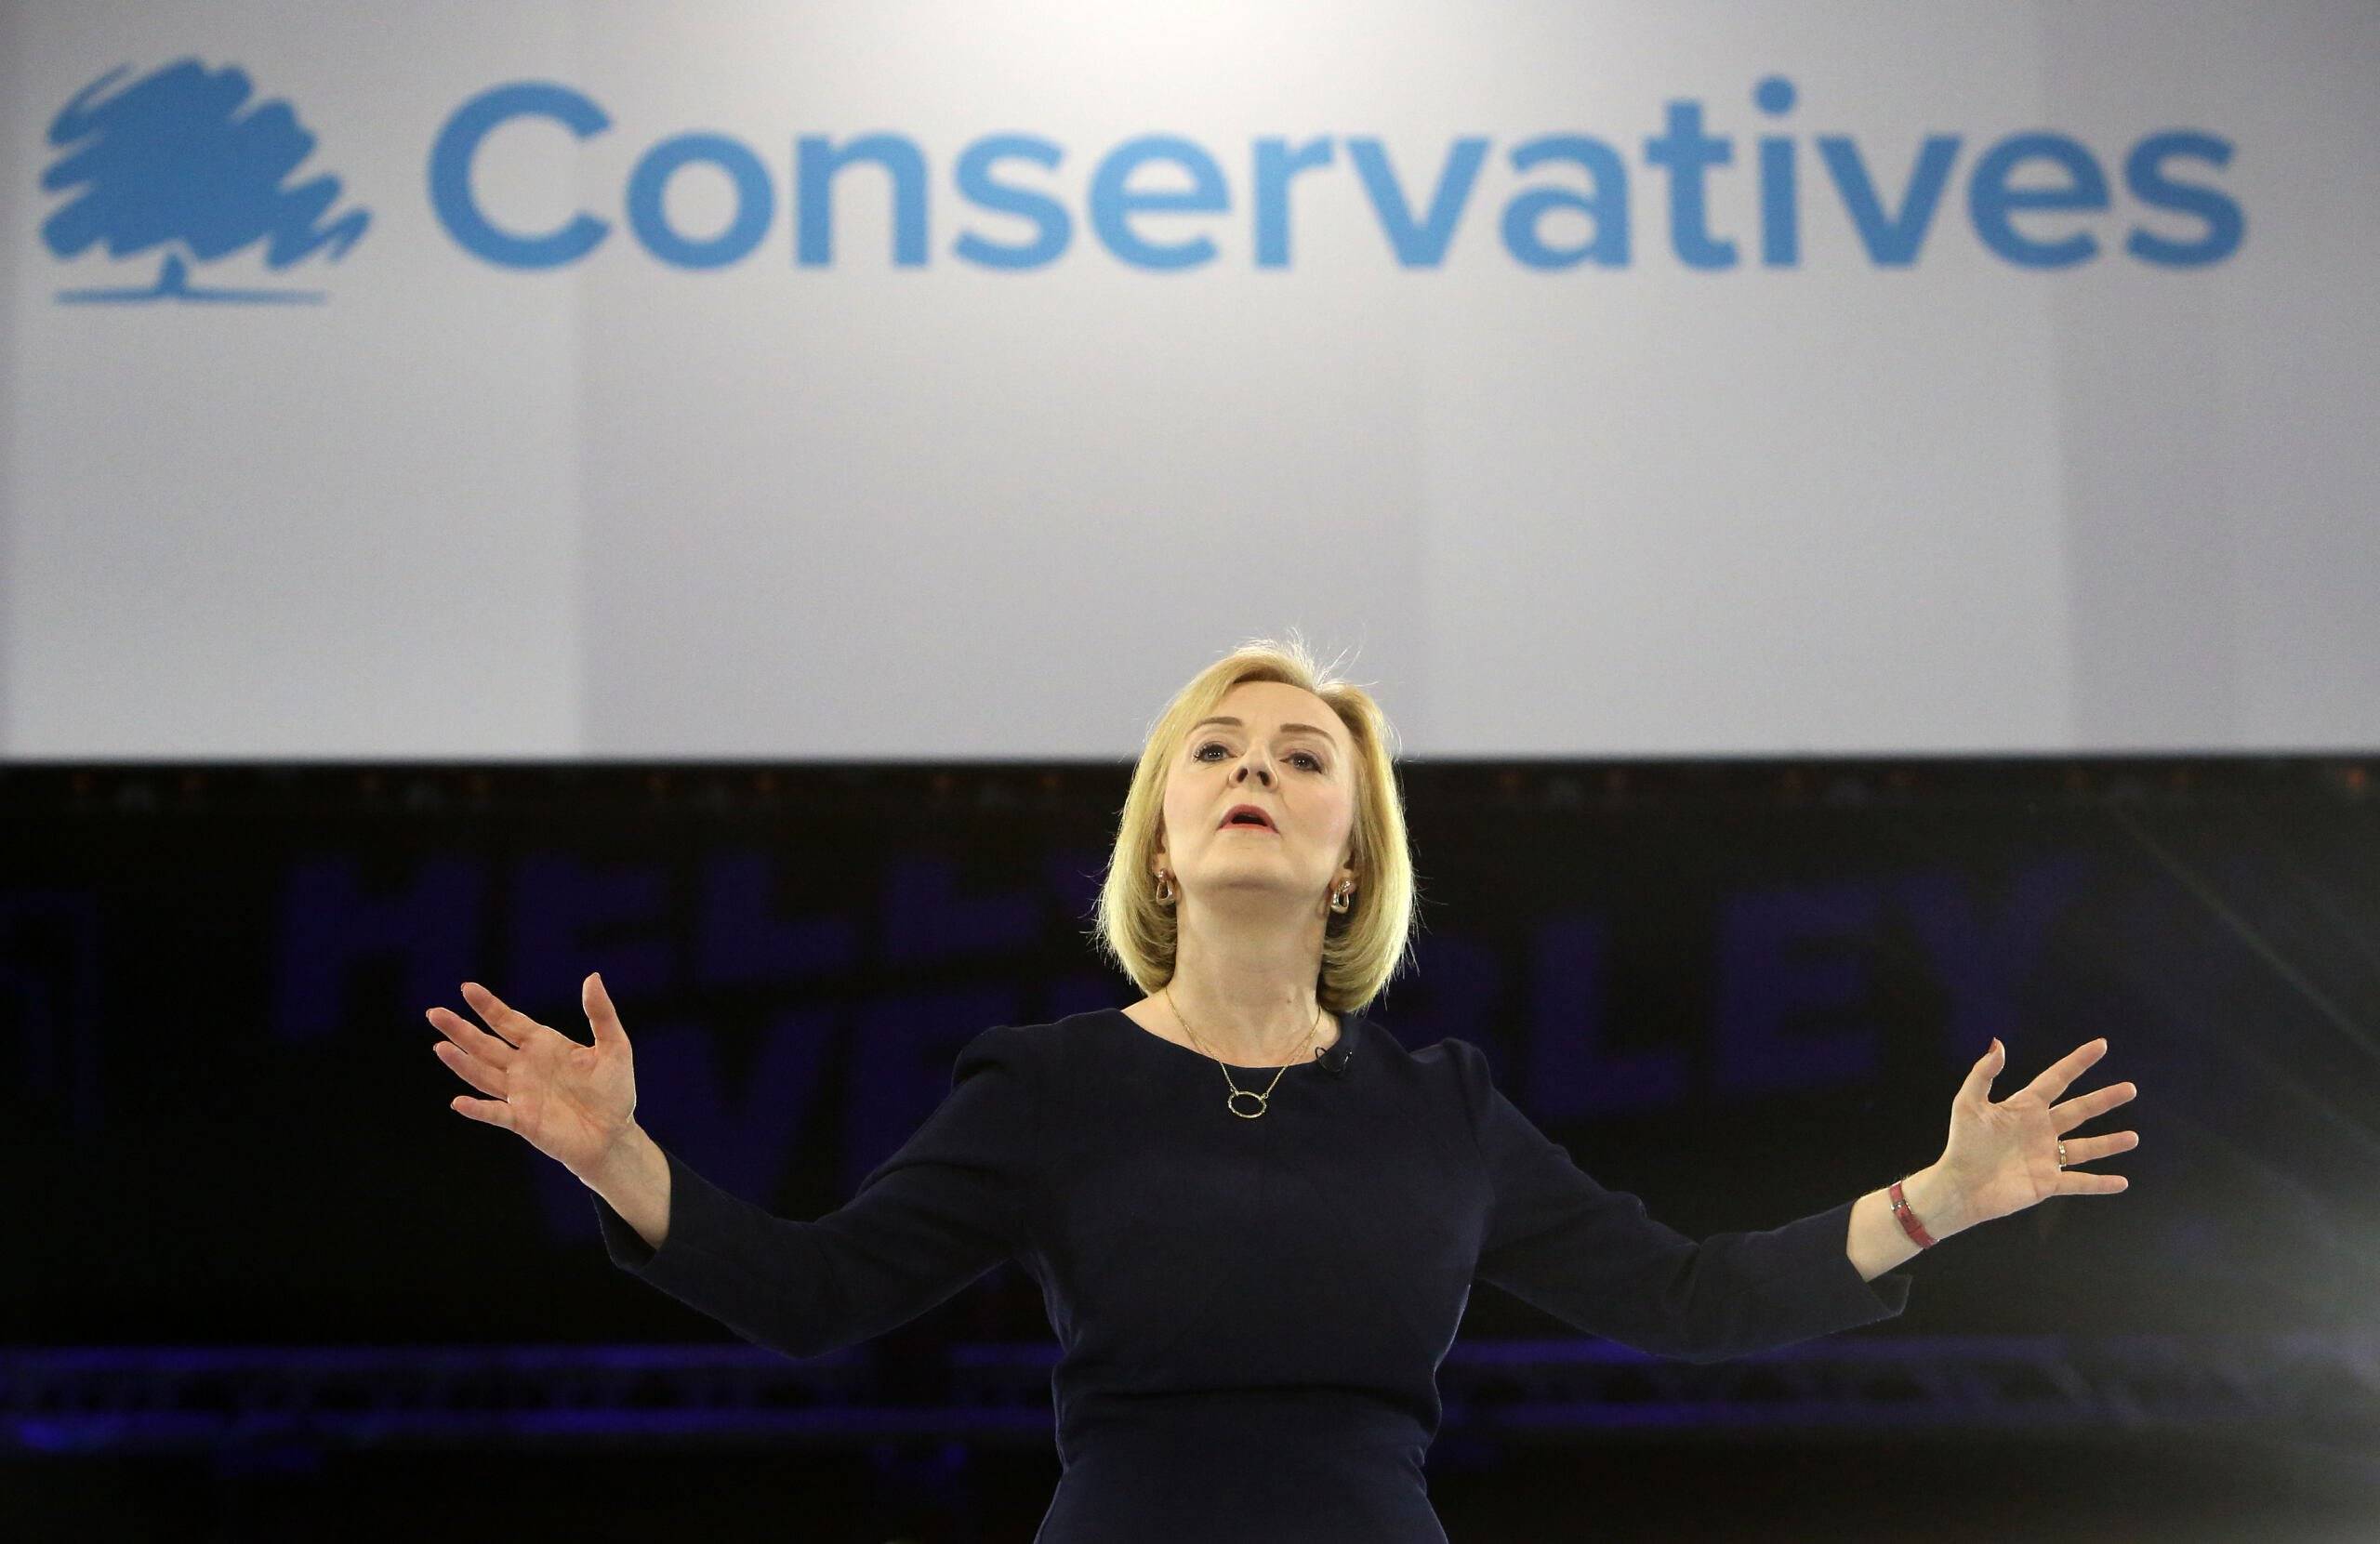 (FILES) In this file photo taken on August 31, 2022 Liz Truss, Britain's Foreign Secretary and a contender to become the country's next Prime Minister and leader of the Conservative party, answers questions as she takes part in a Conservative Party Hustings event at Wembley Arena, in London. - The UK will learn on September 5, 2022 who will be its next prime minister, with foreign minister Liz Truss expected to be announced winner of a lengthy vote by Conservative Party members. The result will be announced at 12.30 pm (1130 GMT), after foreign minister Truss and her rival, former finance minister Rishi Sunak, spent the summer campaigning. (Photo by Susannah Ireland / AFP)